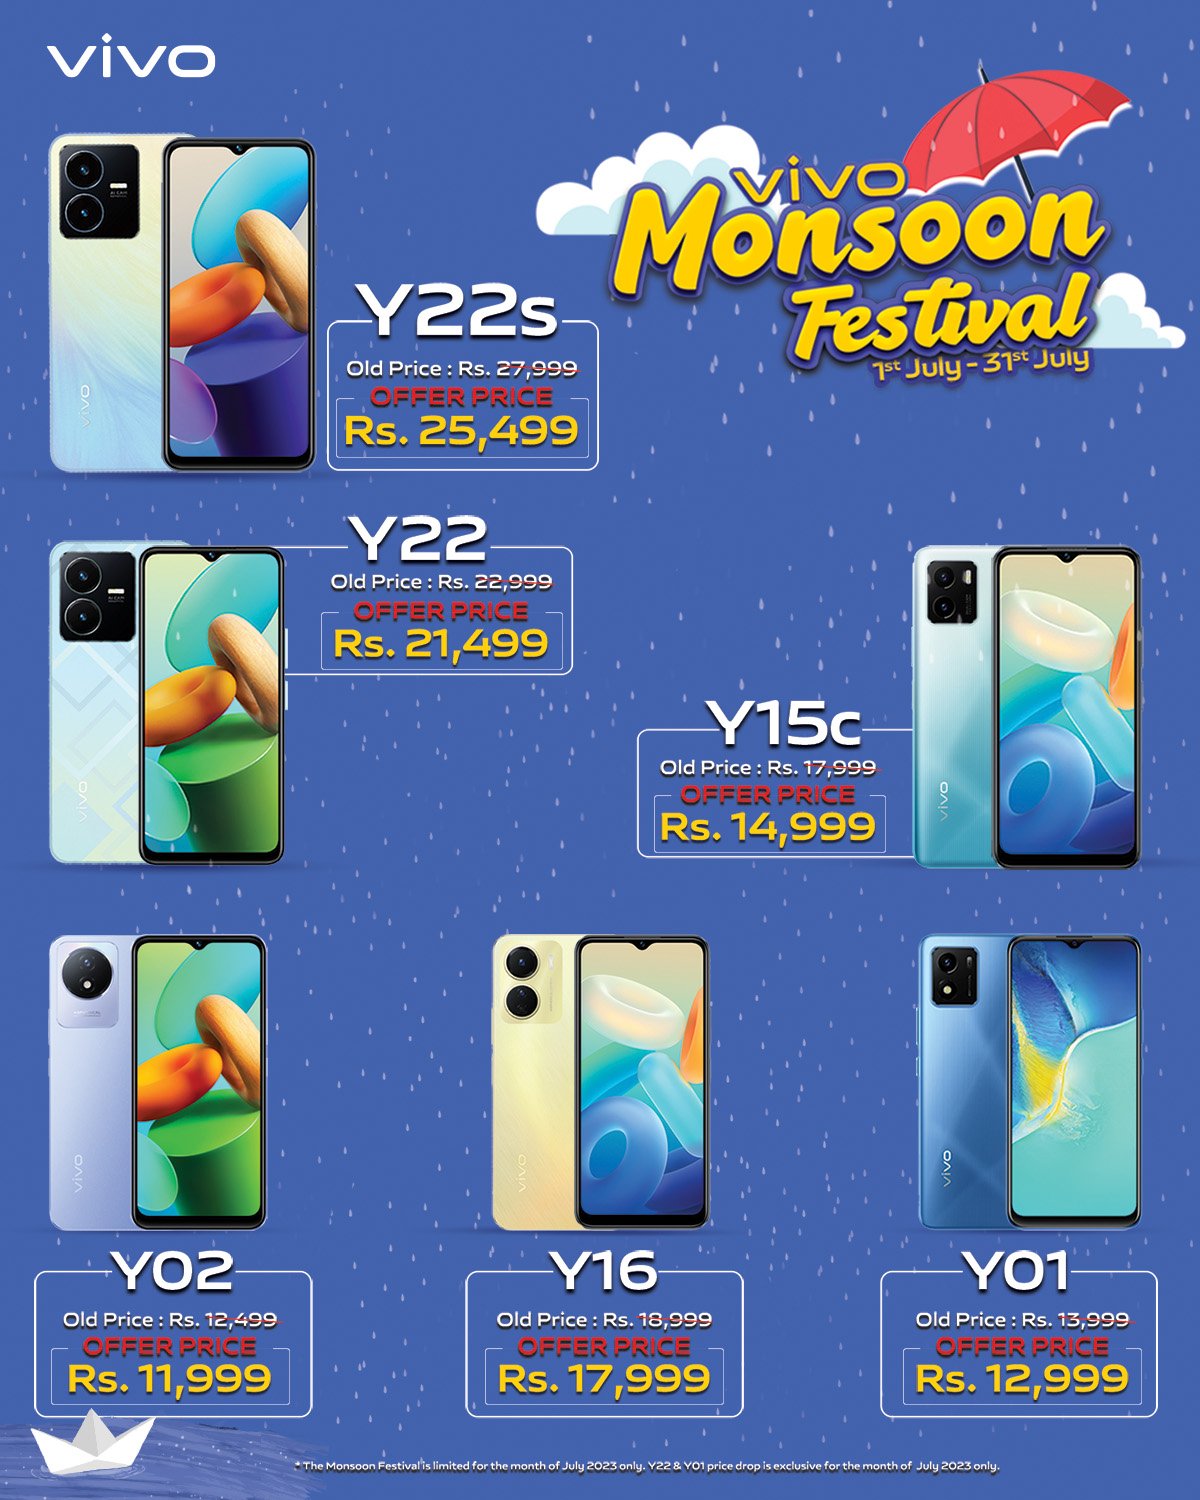 VIVO introduces ‘Monsoon Festival’ featuring discounts on Y Series smartphones